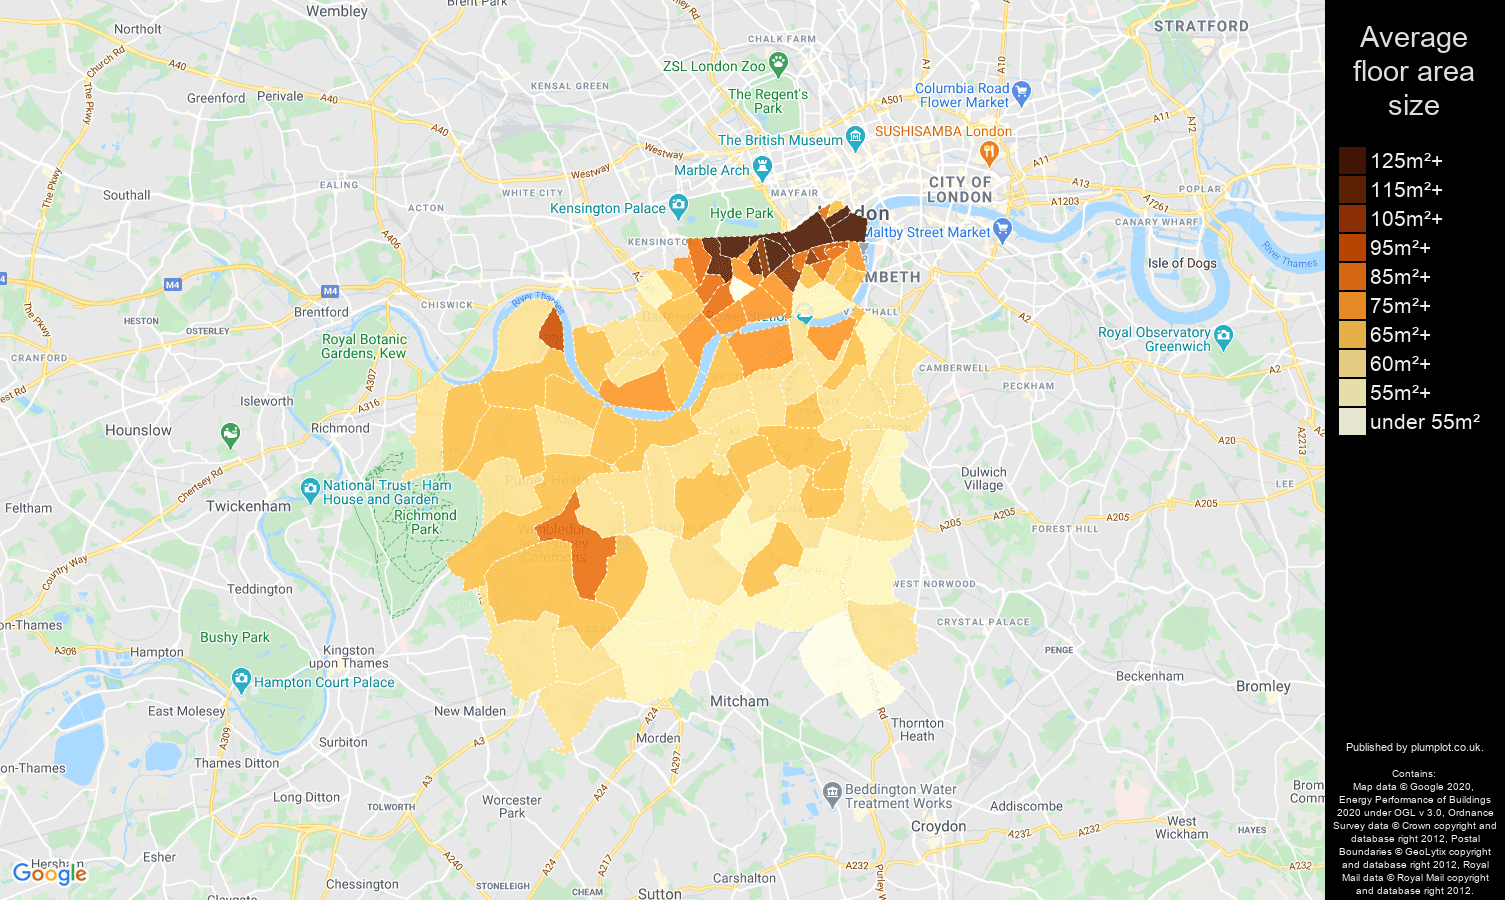 South West London map of average floor area size of flats